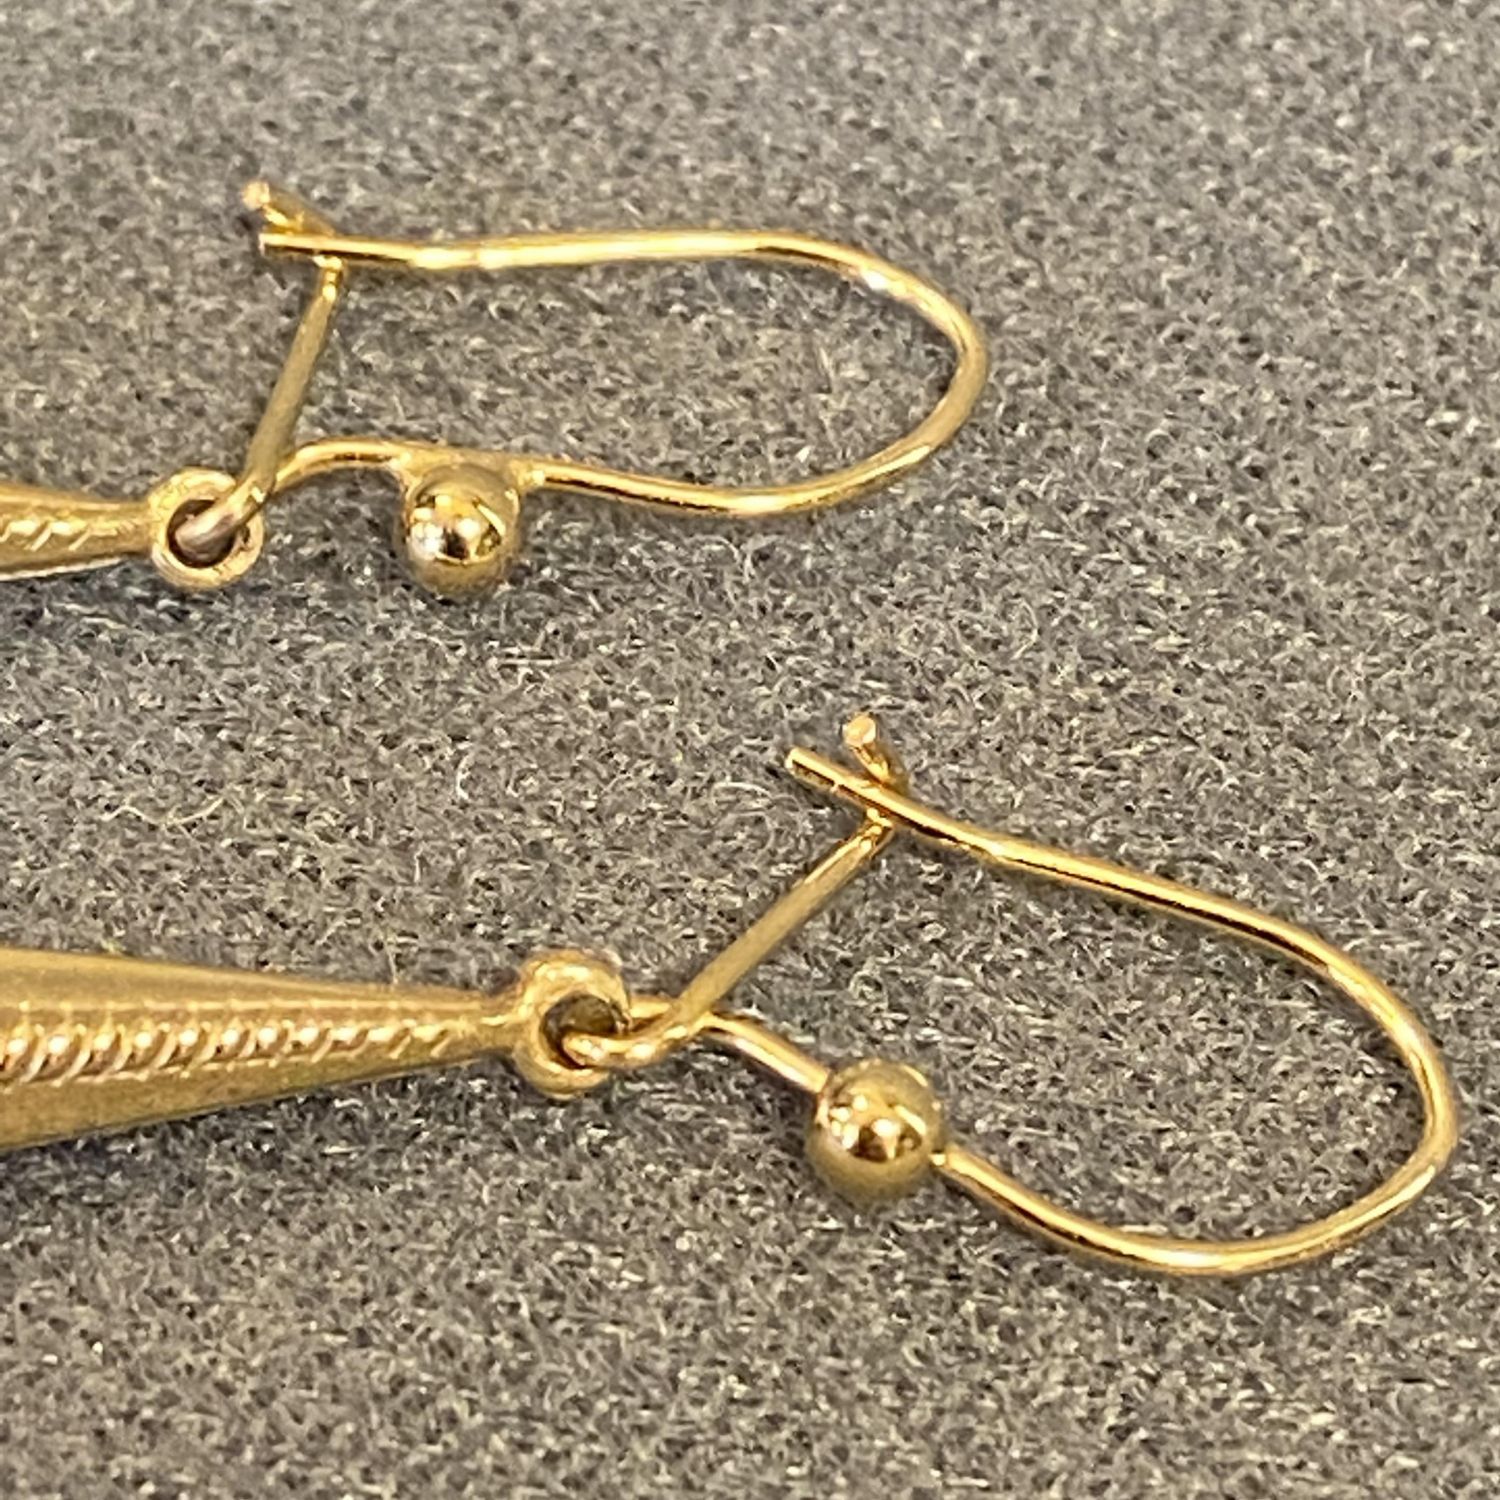 Vintage 9ct Gold Drop Earrings - Jewellery & Gold - Hemswell Antique ...